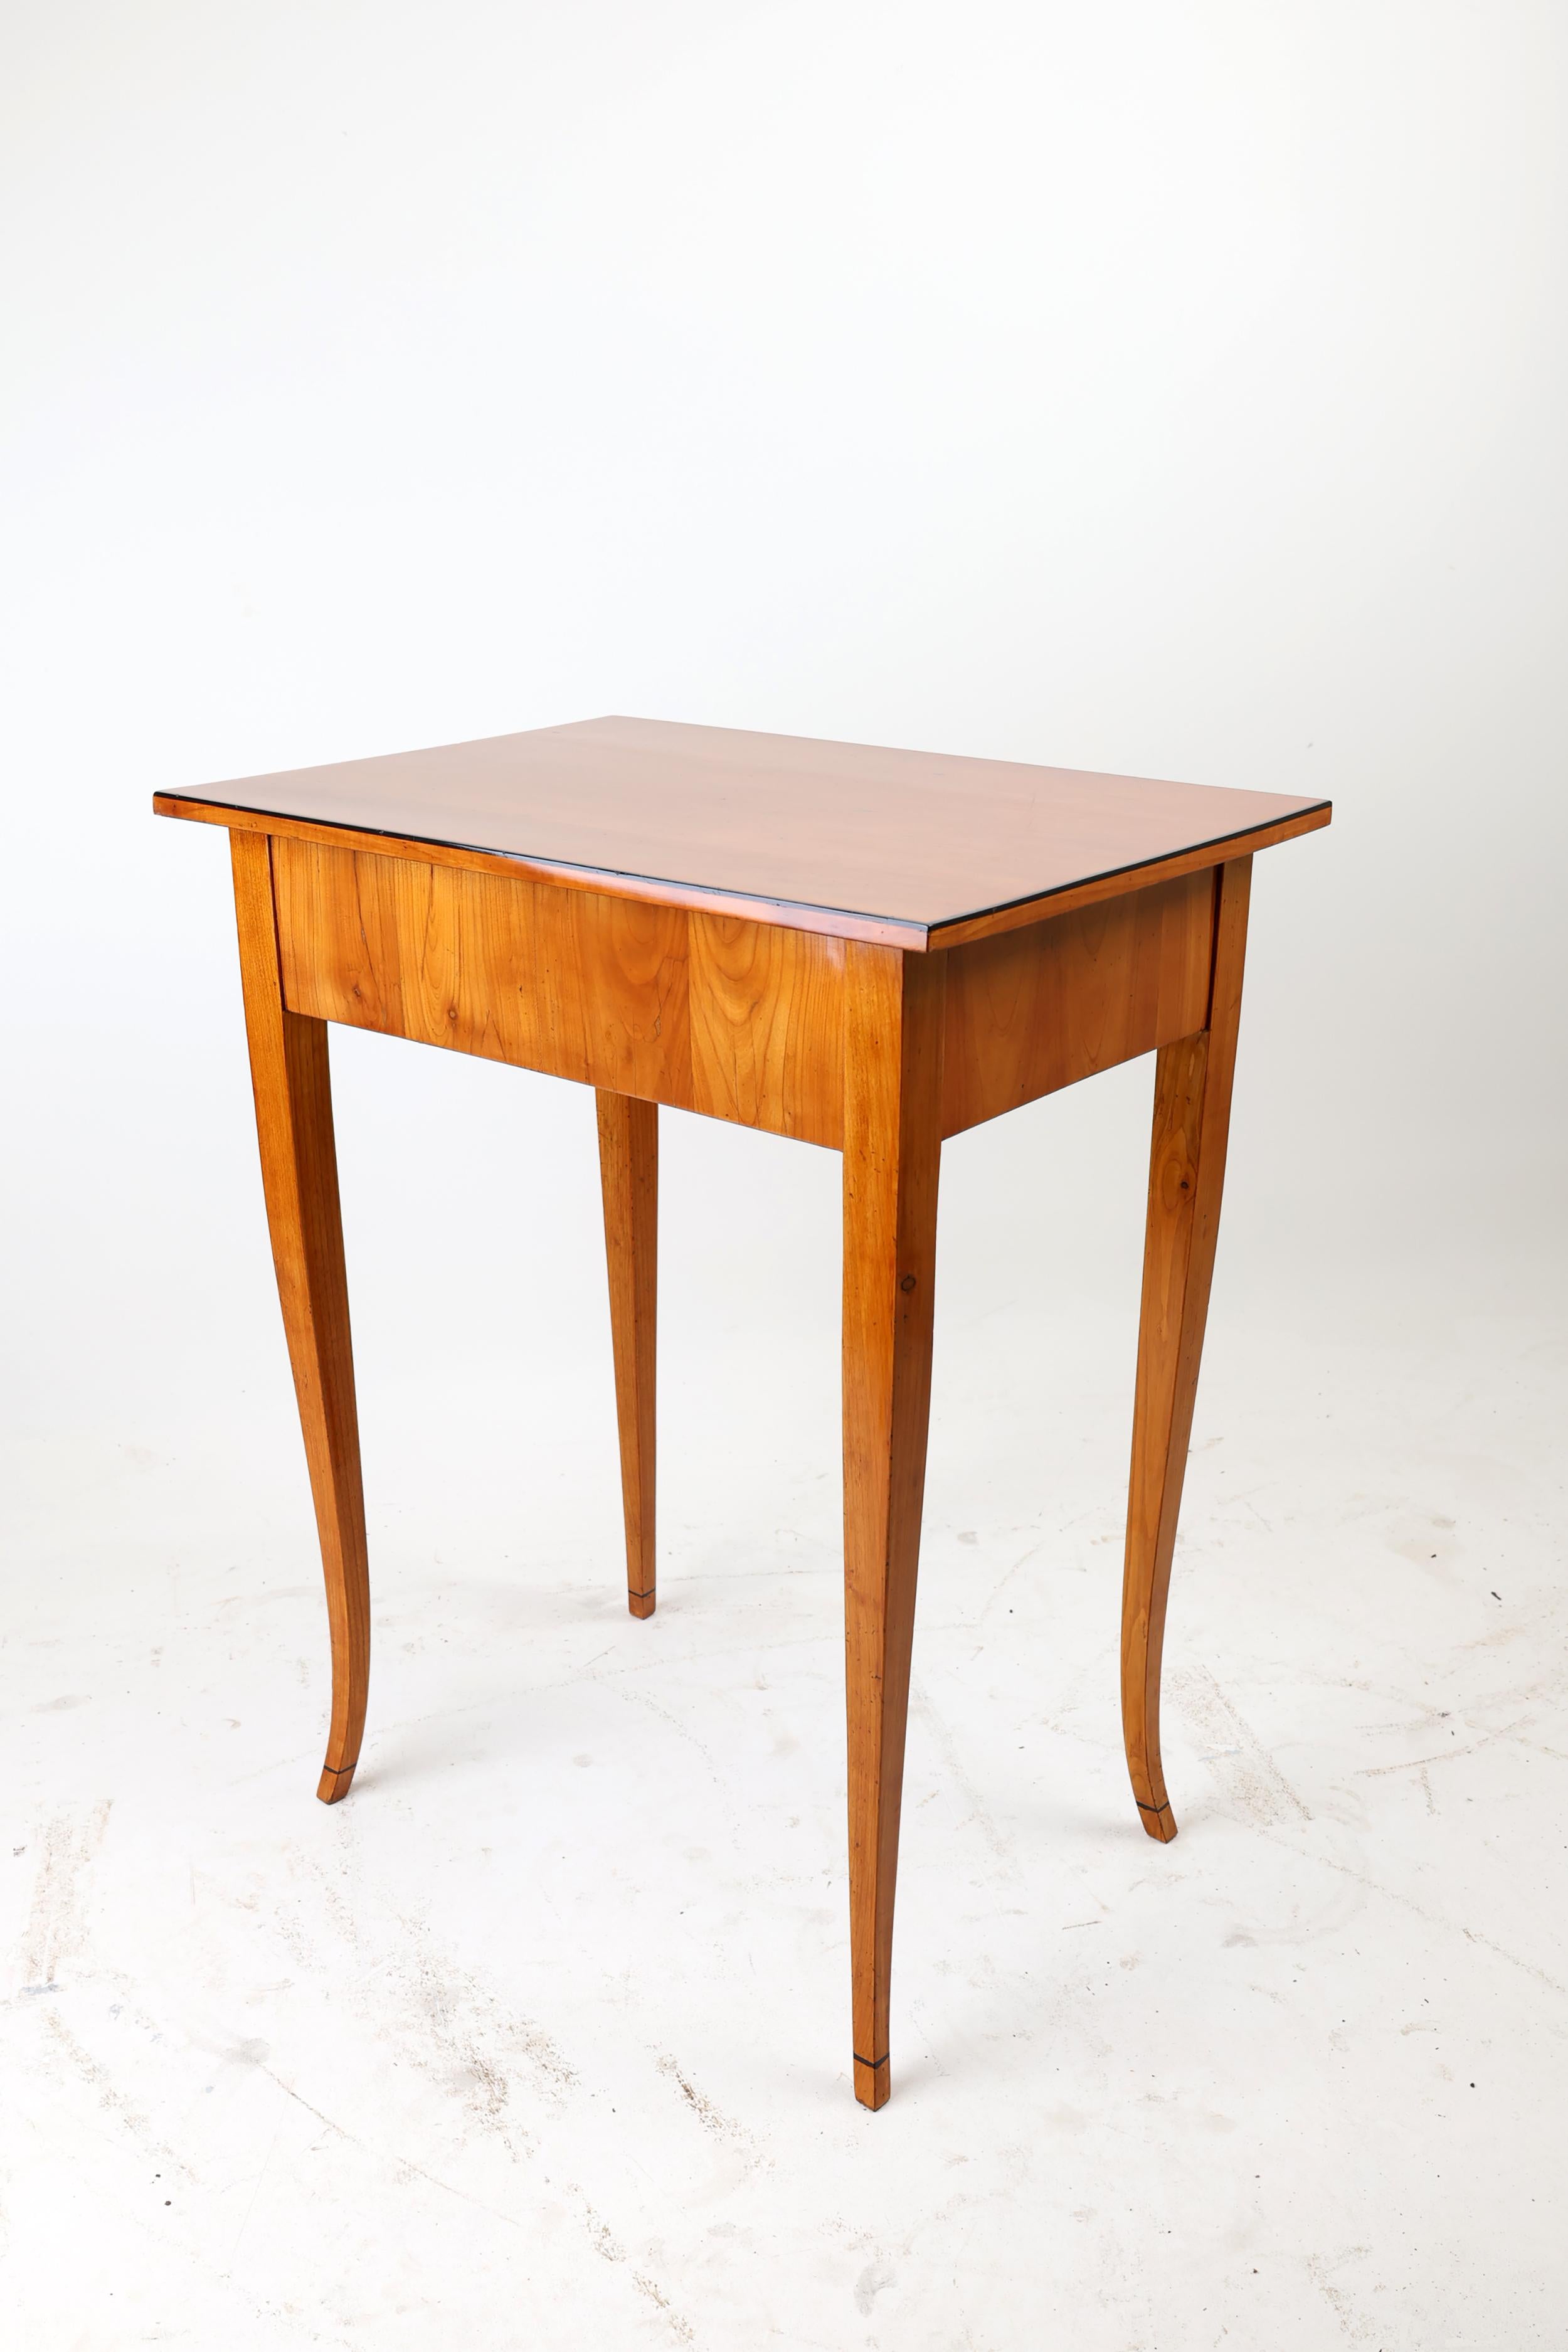 Early 19th Century Biedermeier Side Table,
1820-1825, South Germany
Cherry wood

,,The Biedermeier period was an era in Central Europe between 1815 and 1848 during which the middle classes grew in number and the arts began to appeal to their